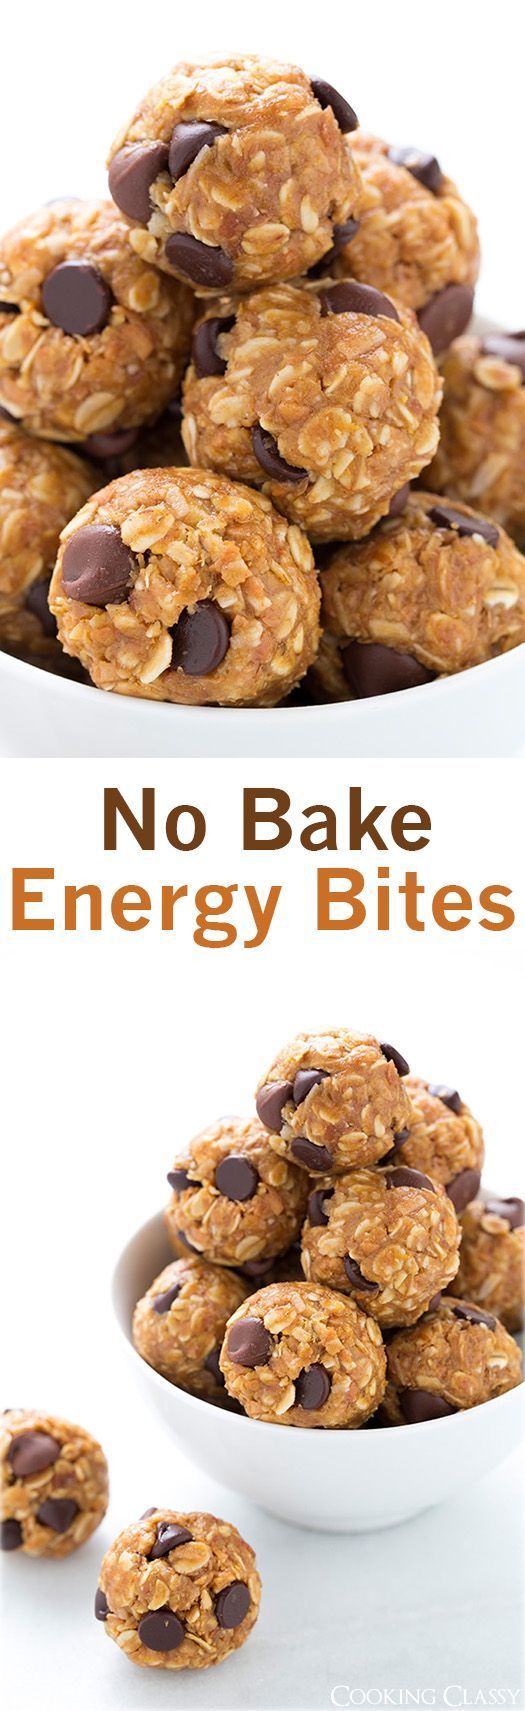 No Bake Energy Bites – these are the best snack EVER, and theyre healthy! I make them all the tim